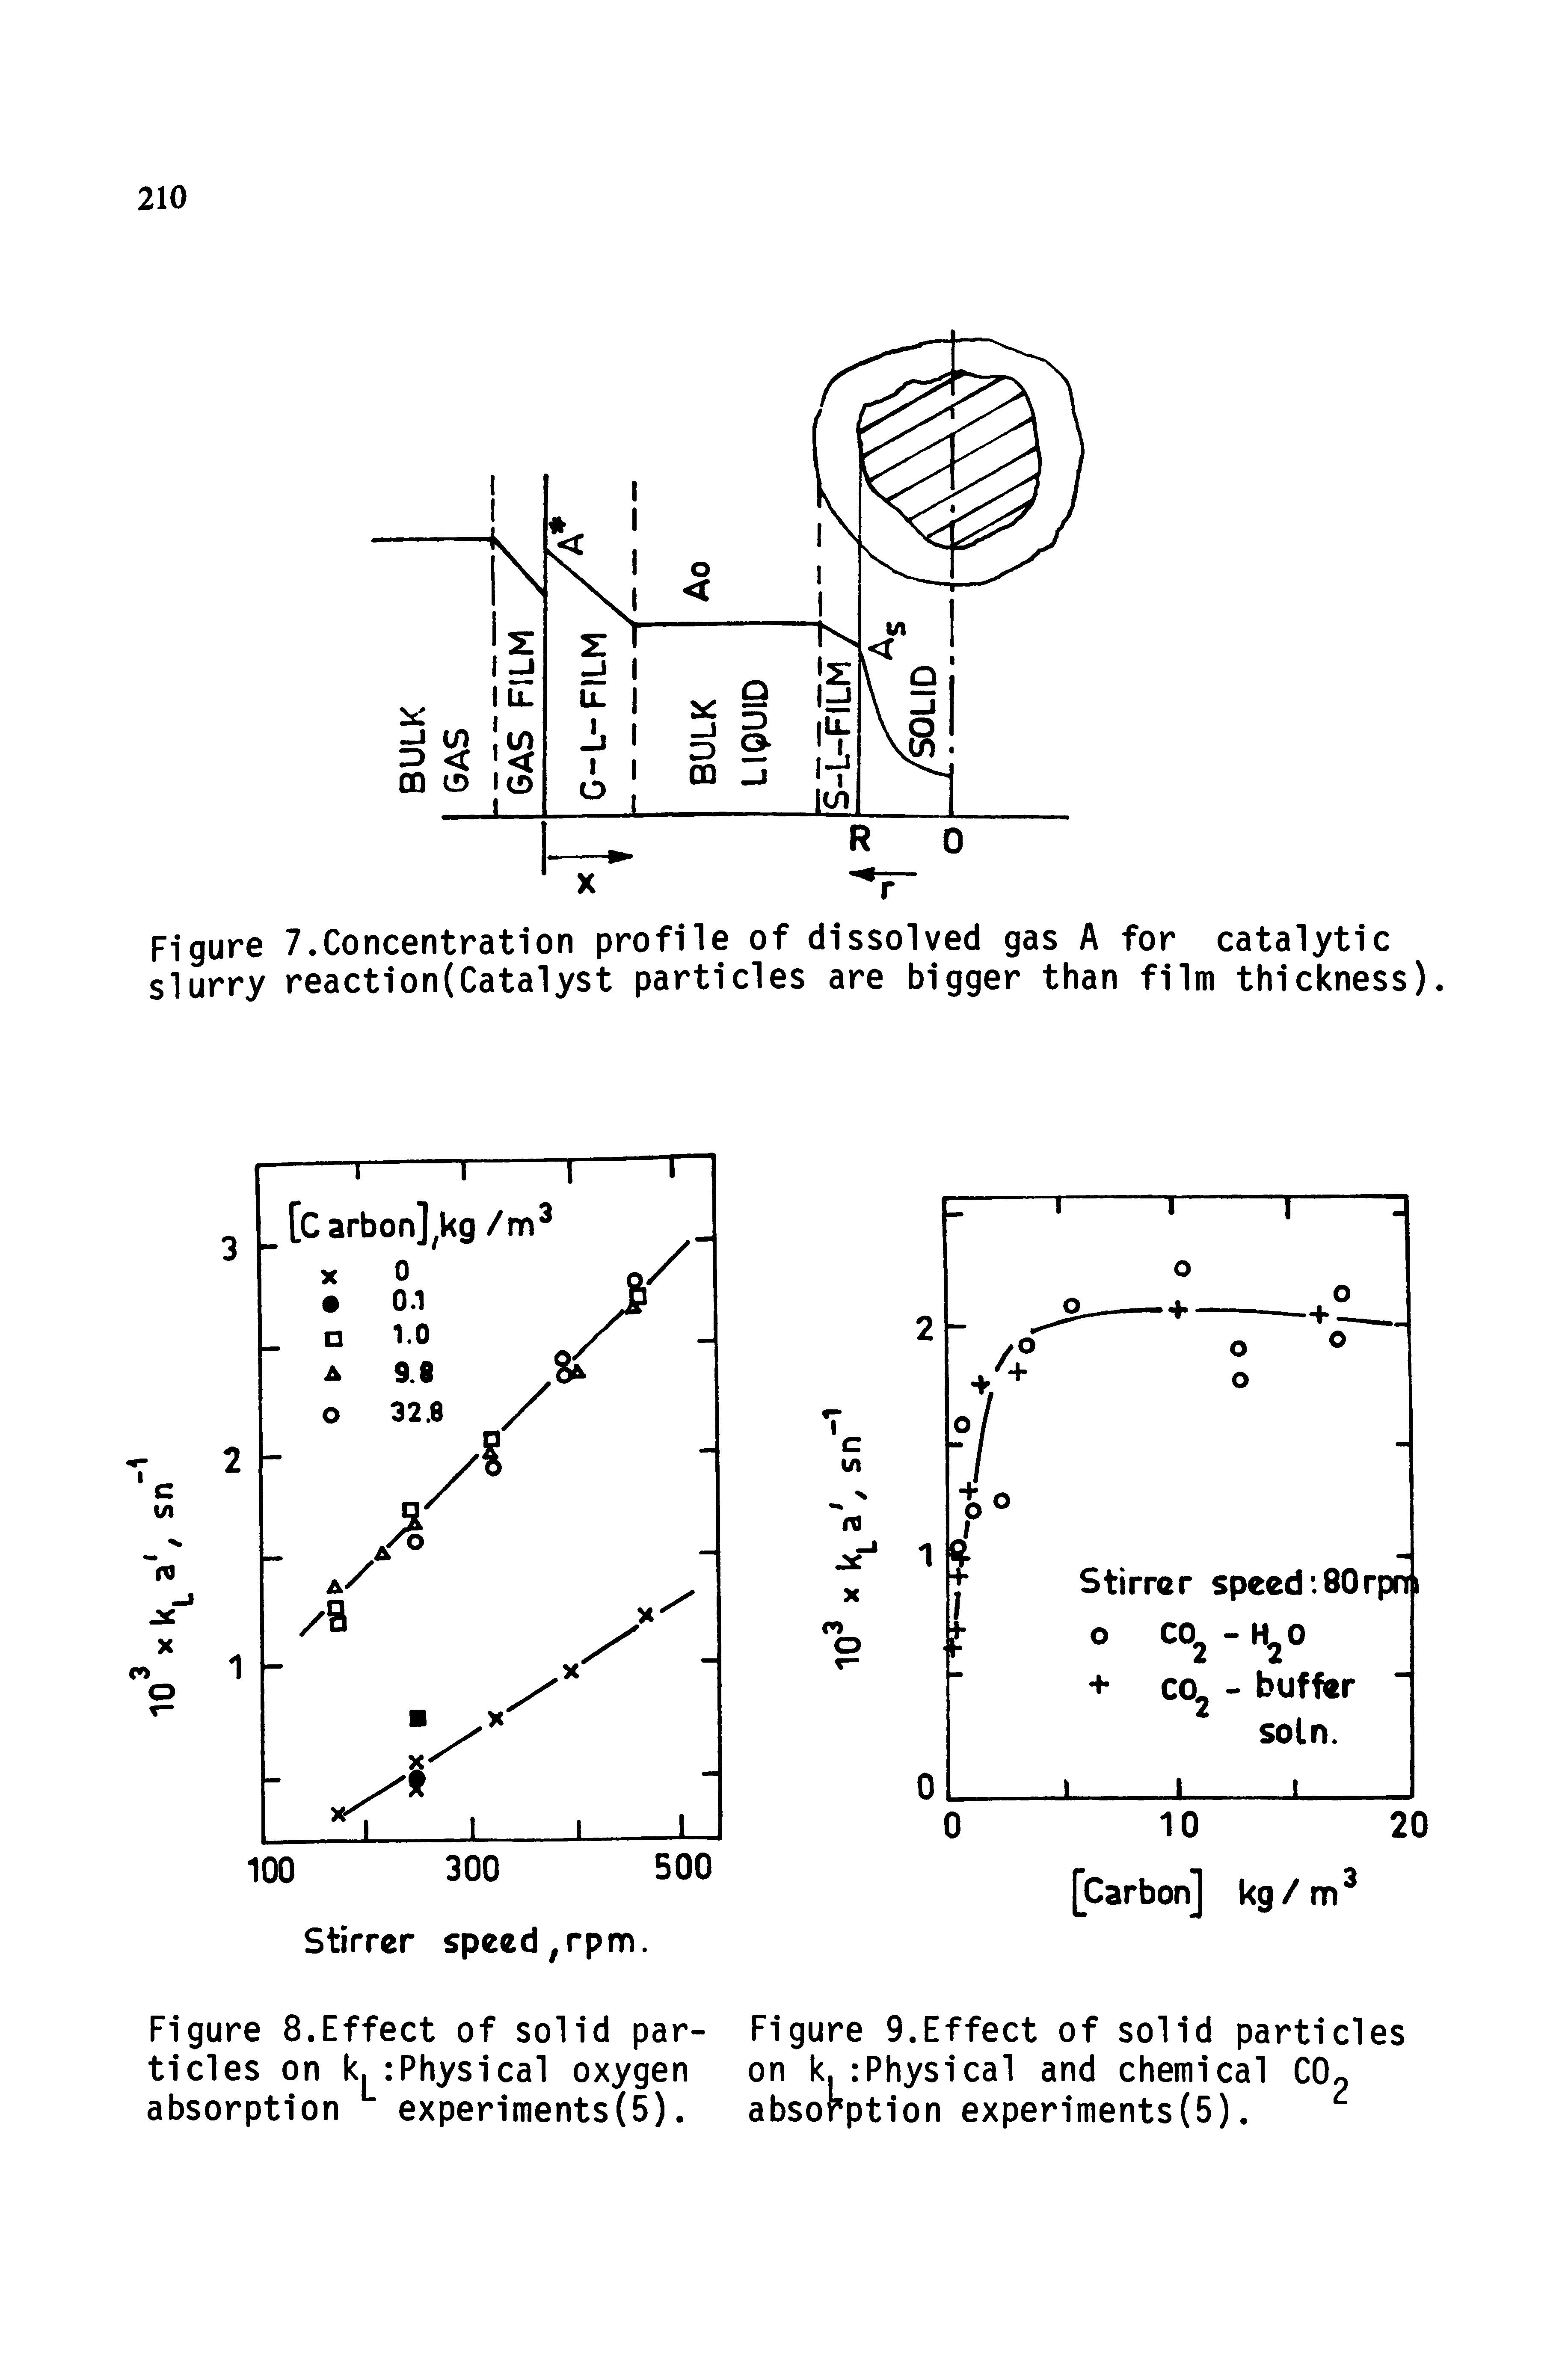 Figure 7.Concentration profile of dissolved gas A for catalytic slurry reaction(Catalyst particles are bigger than film thickness).